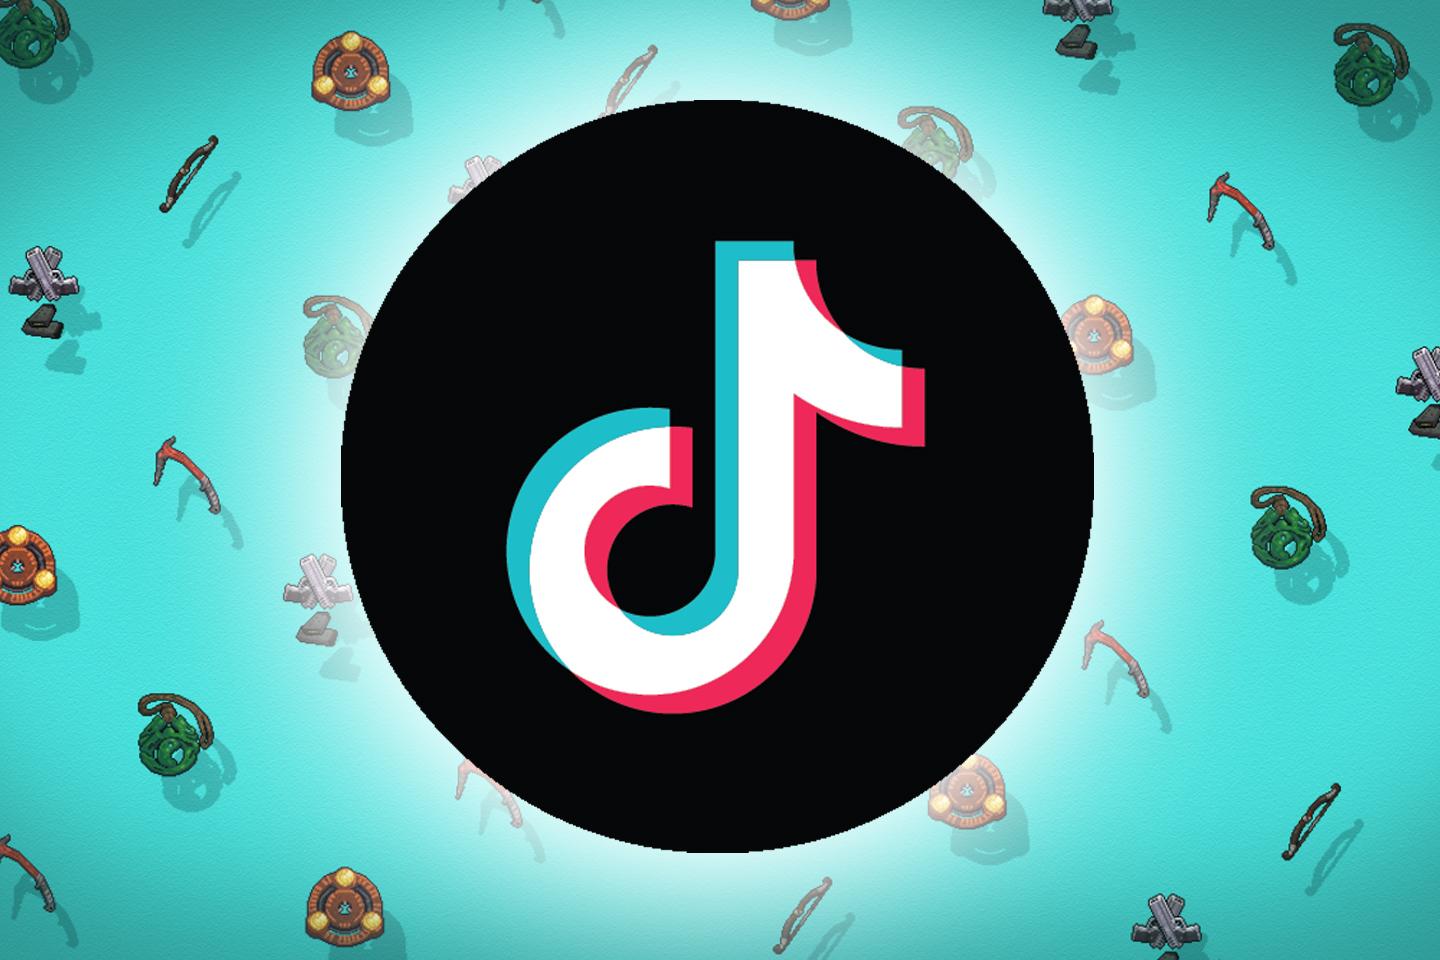 TikTok Logo surrounded by pixel items from Tomb Raider history.